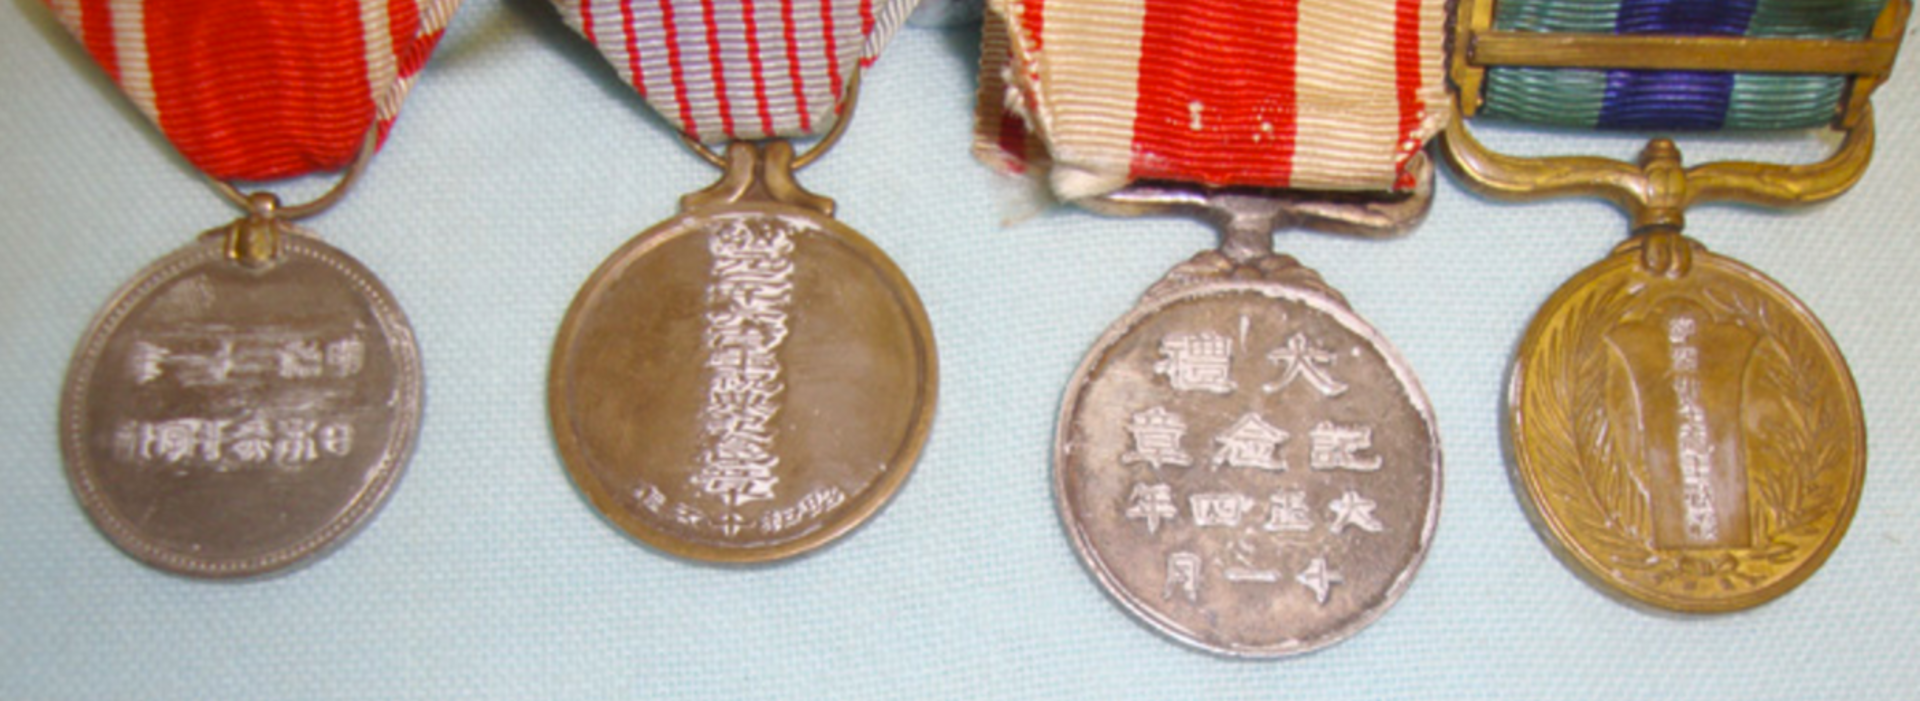 Mounted for wear, Japanese Medal Group (4 Medals) from the Estate of Major W Rawlings I.A.O.C. - Image 2 of 3